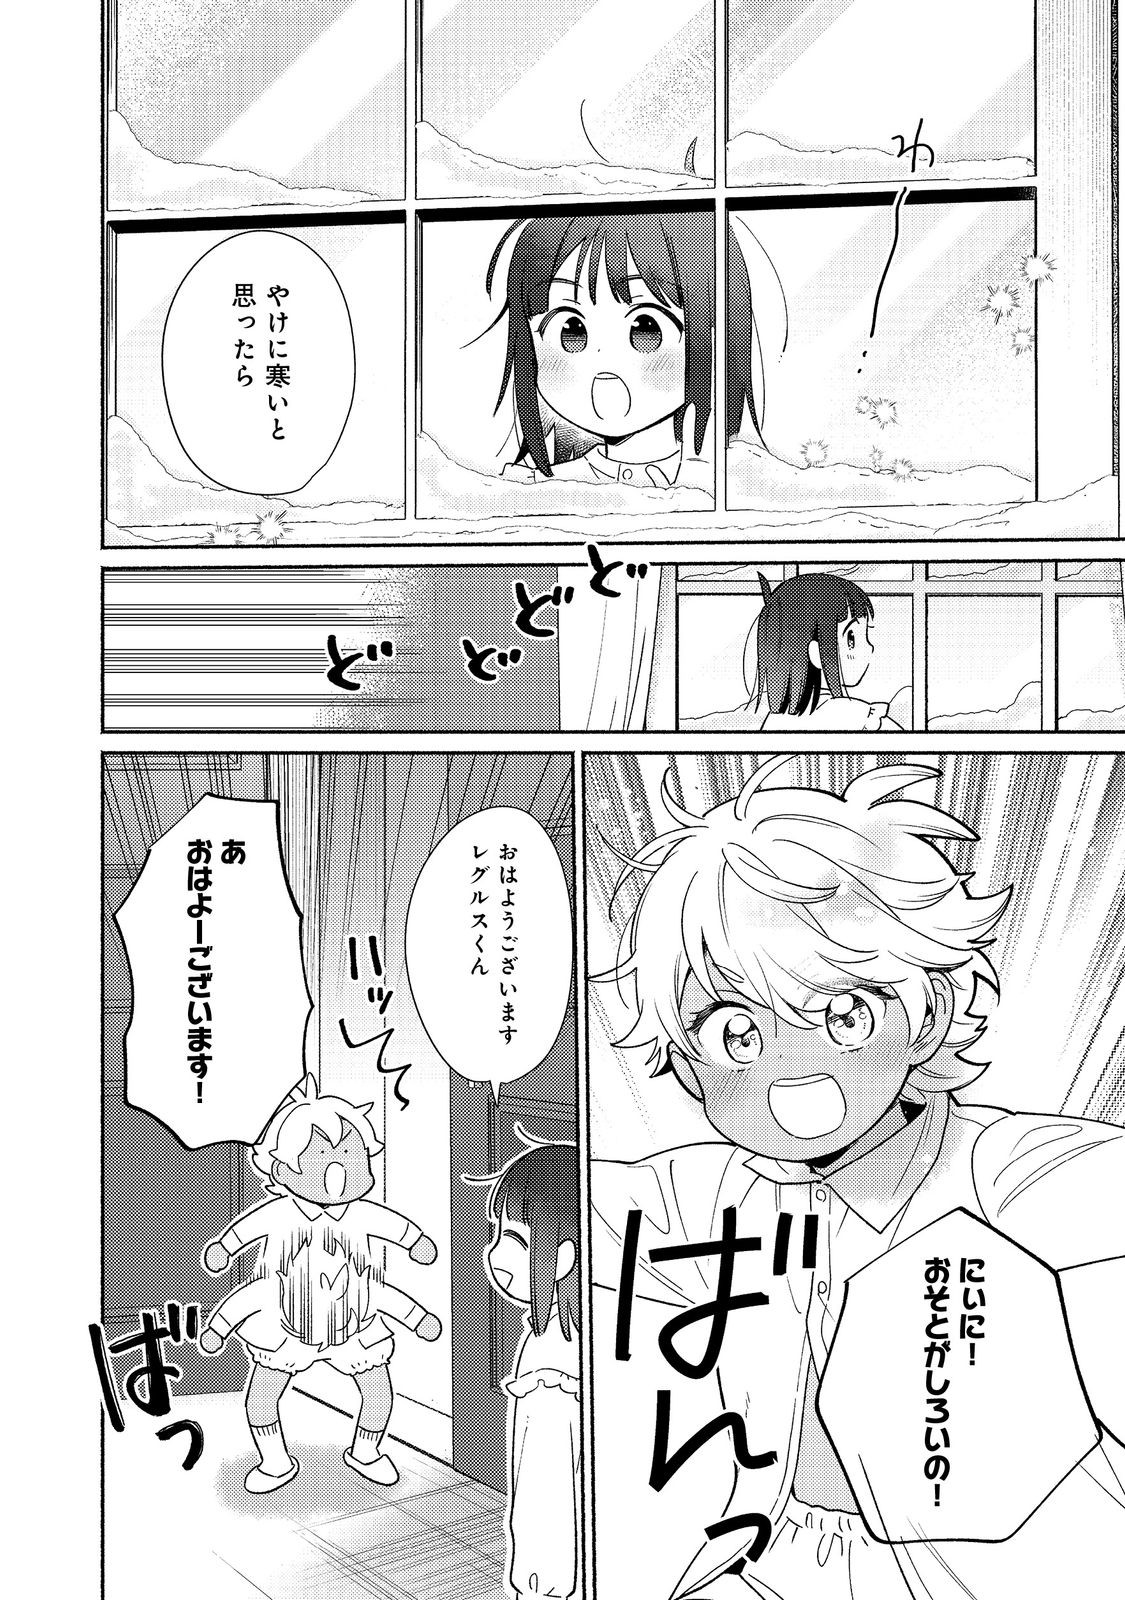 I’m the White Pig Nobleman 第23.2話 - Page 5